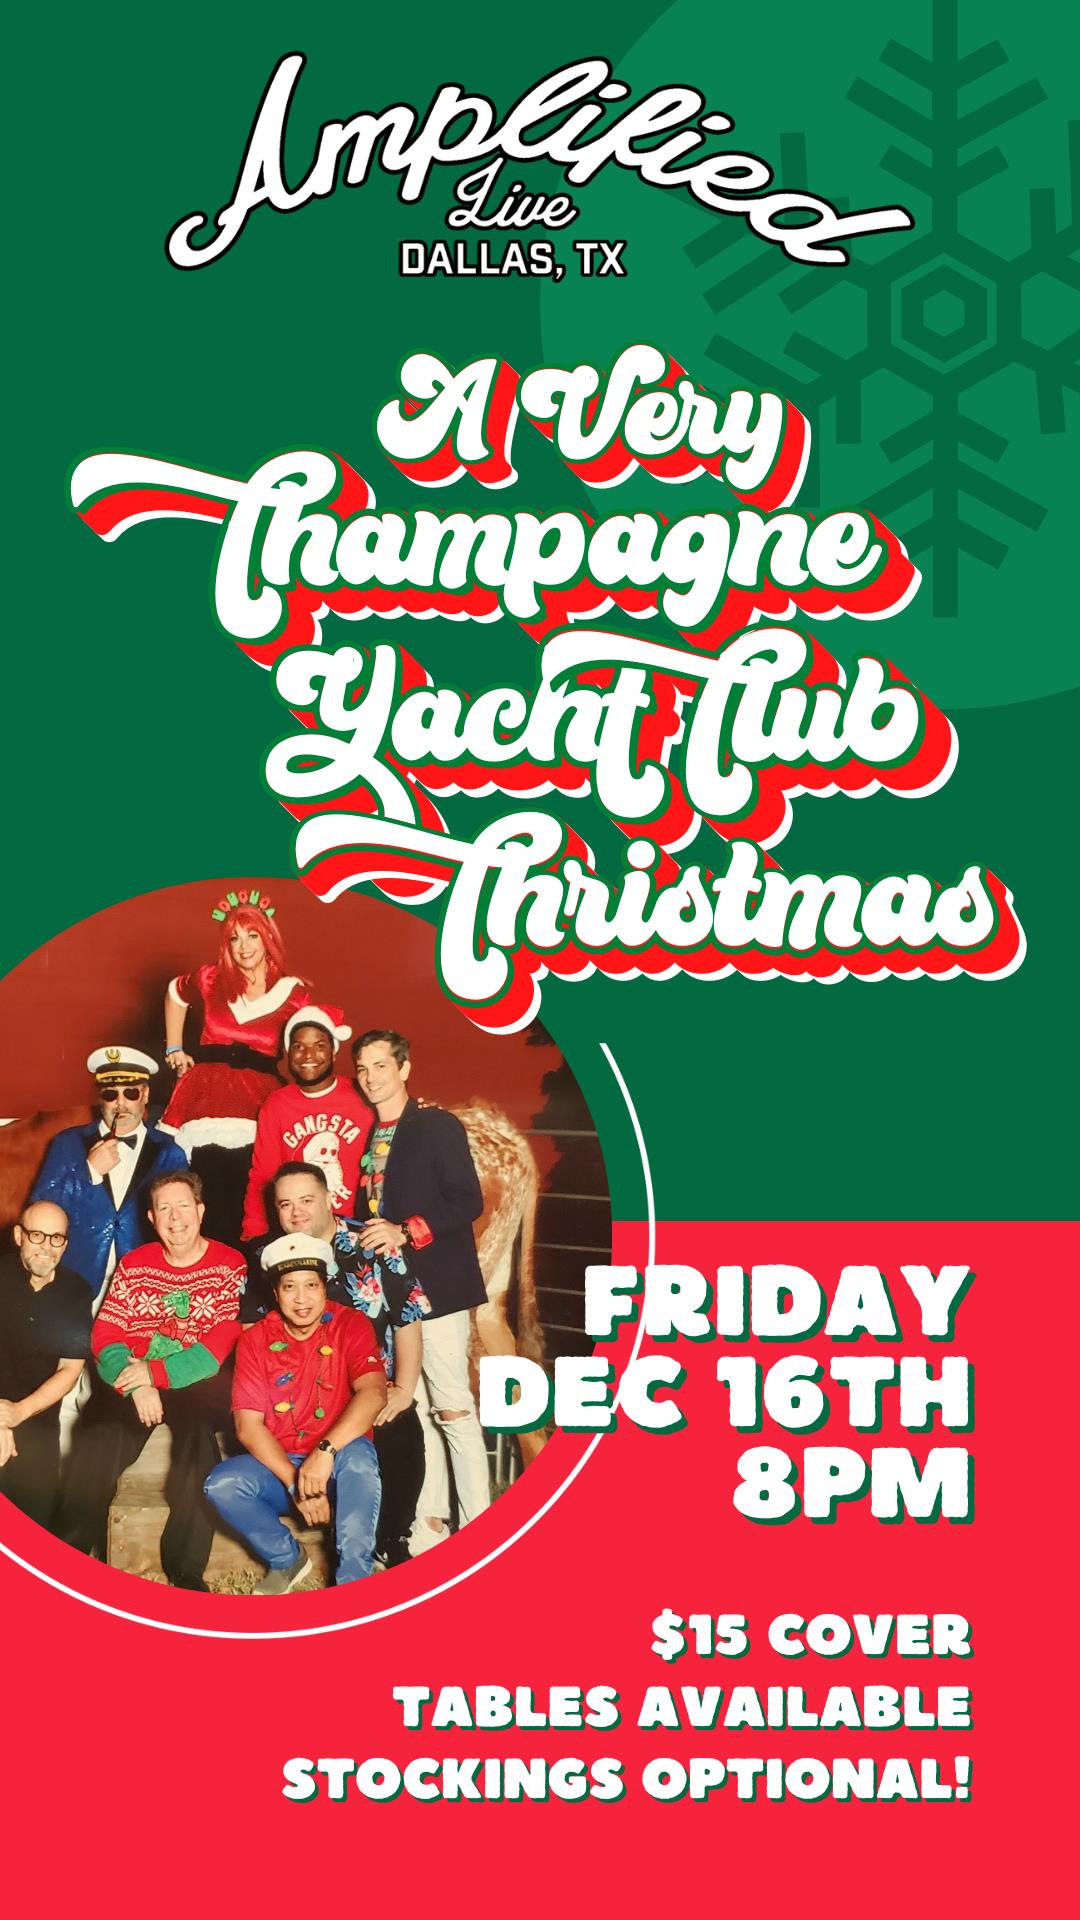 A Very Champagne Yacht Club Christmas